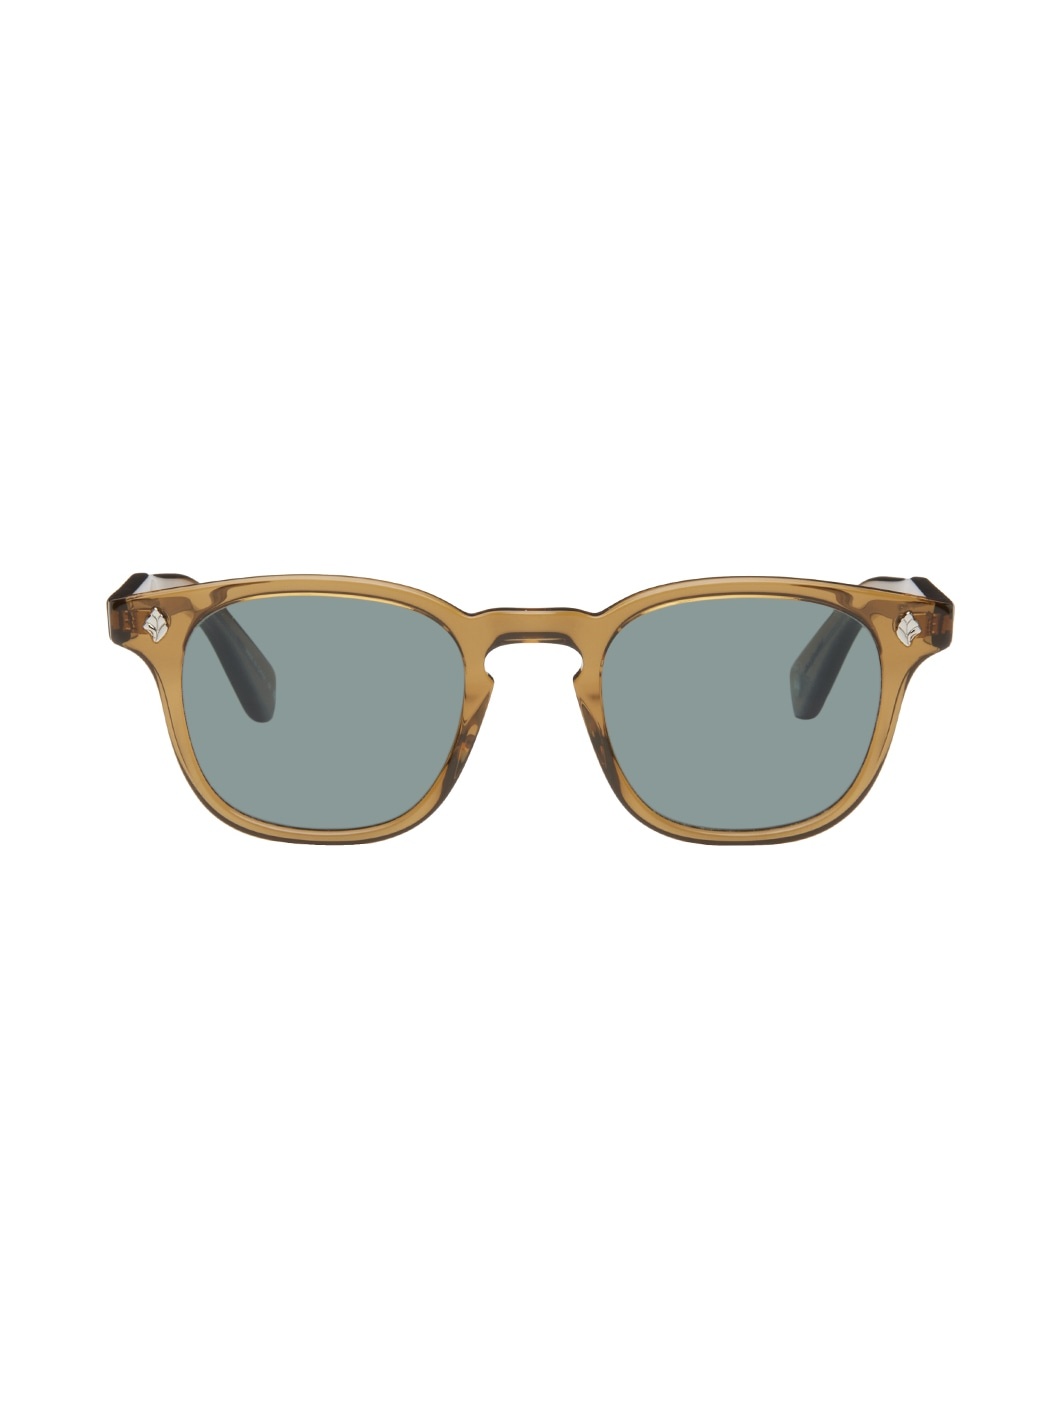 Brown Ace Sunglasses - 1